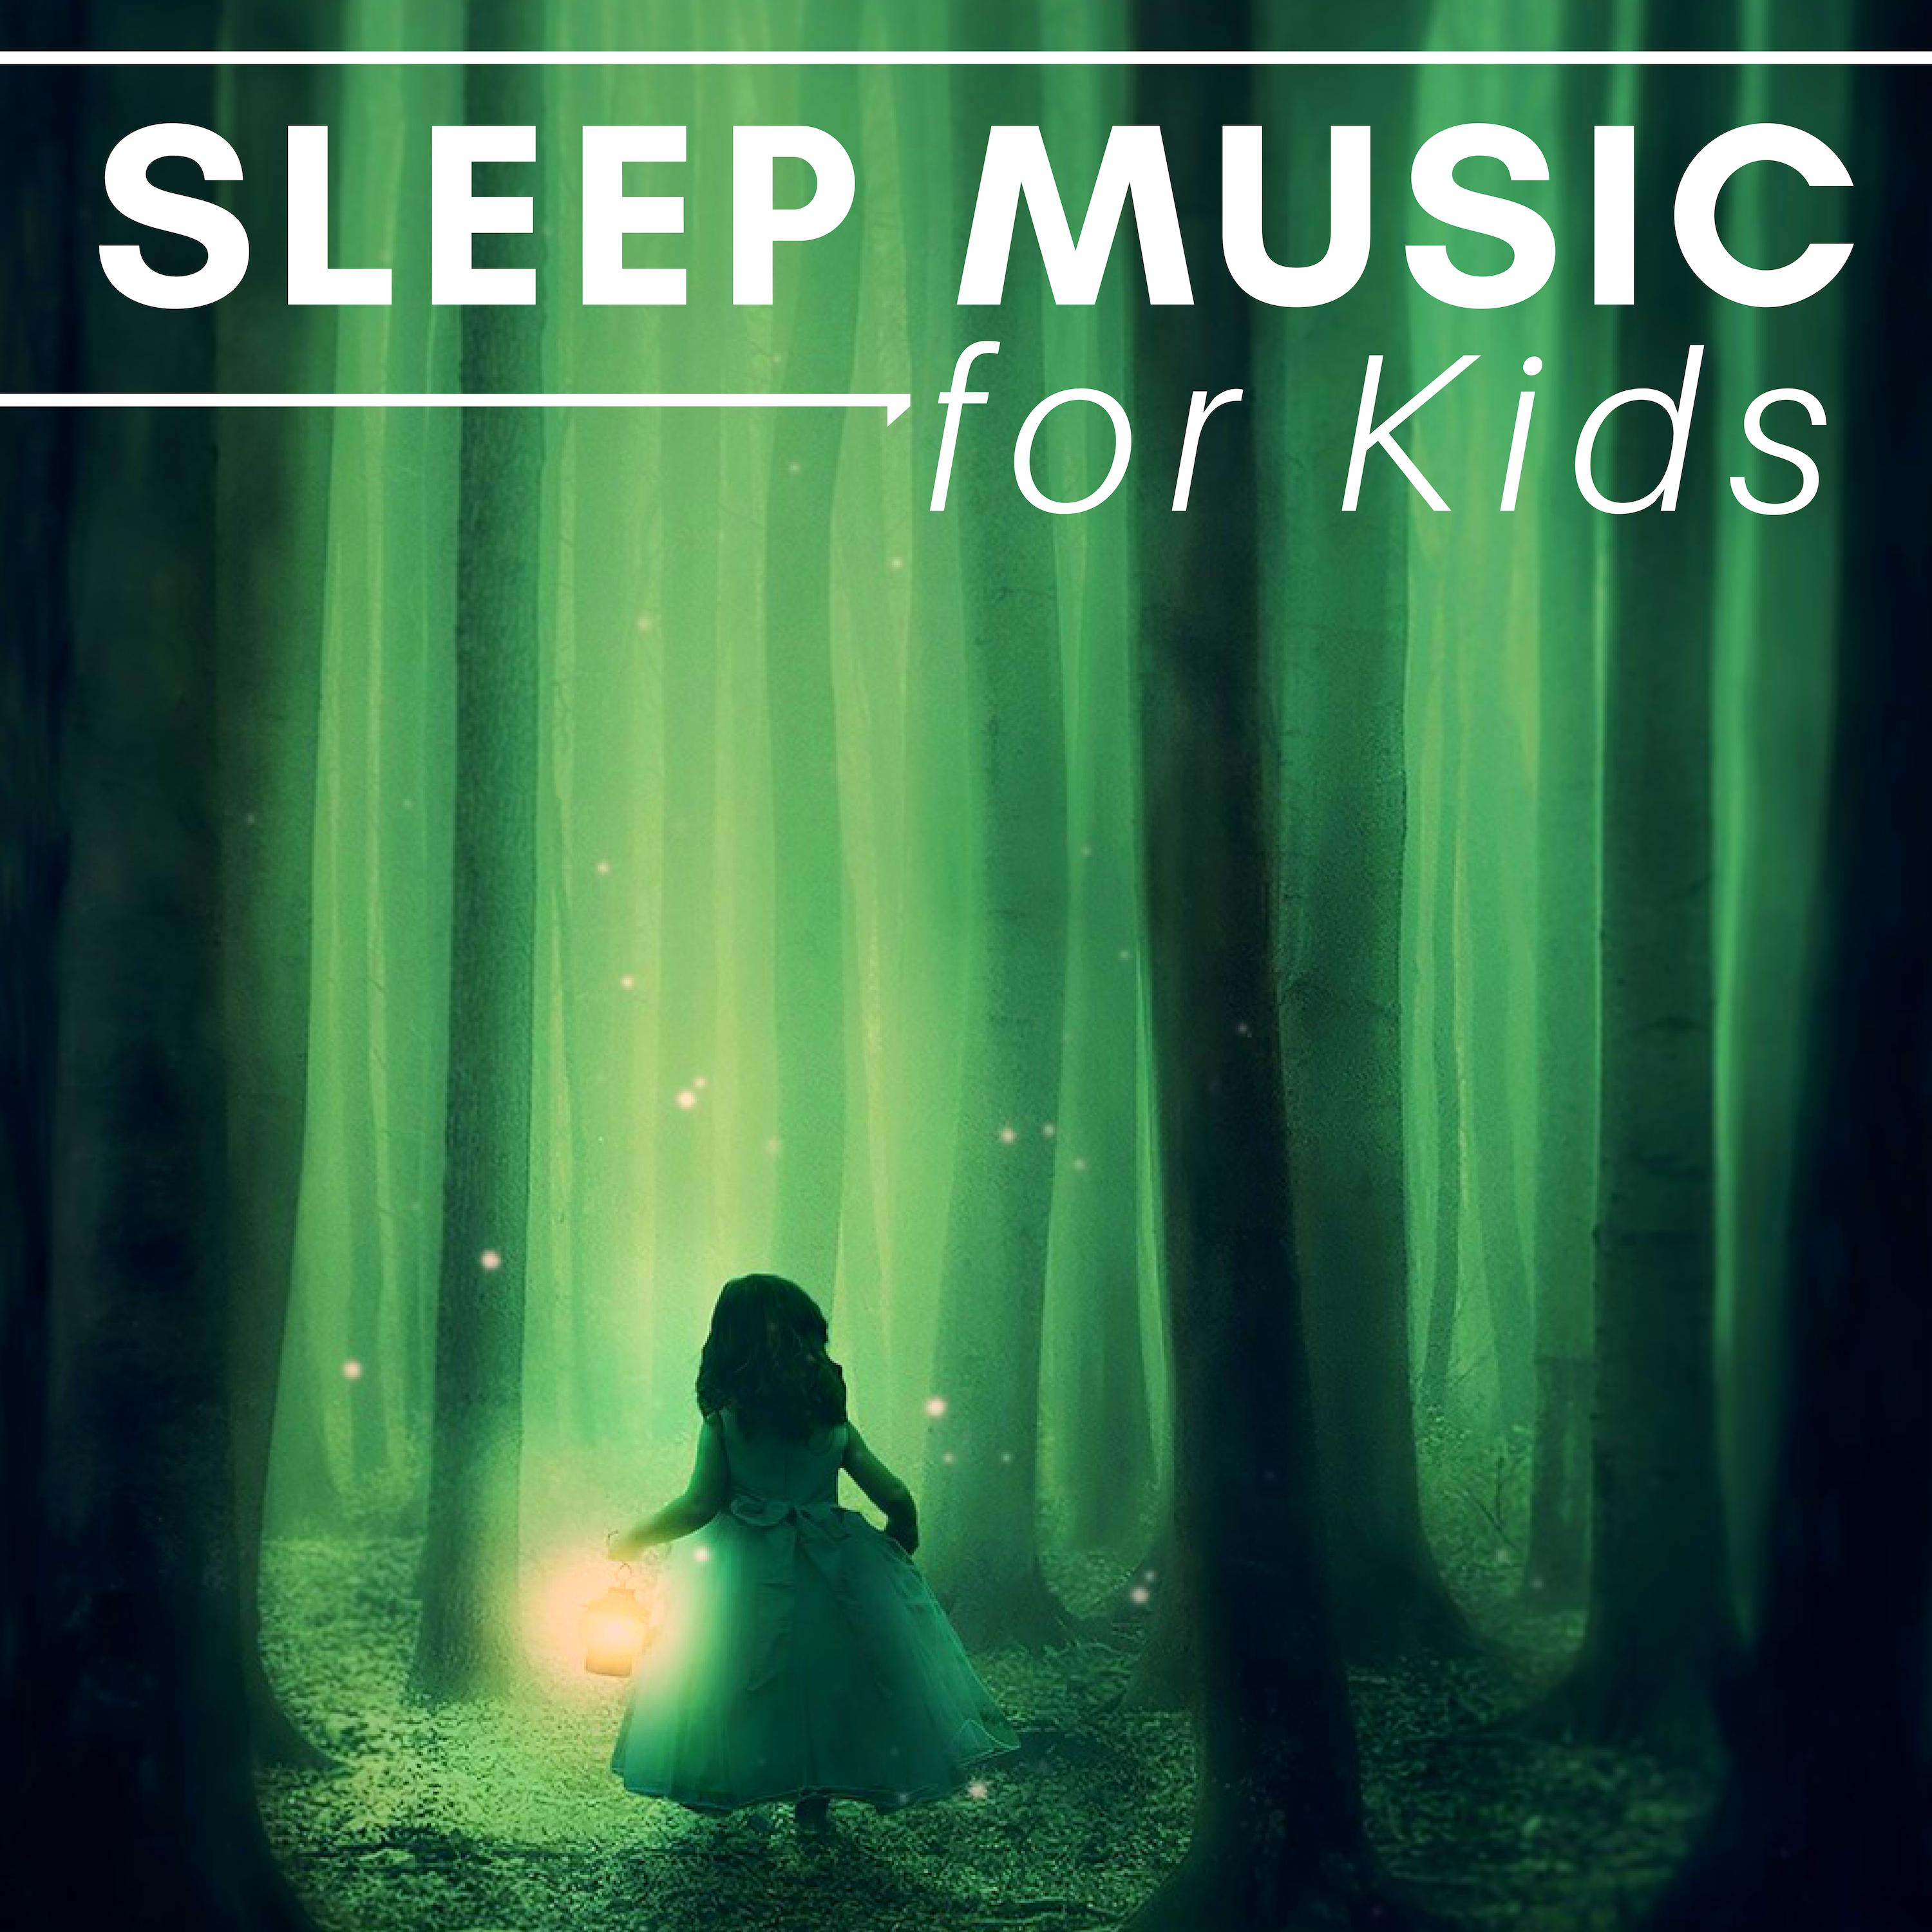 Sleep Music CD for Kids: Soothing Mp3 Tracks for Children & the Whole Family